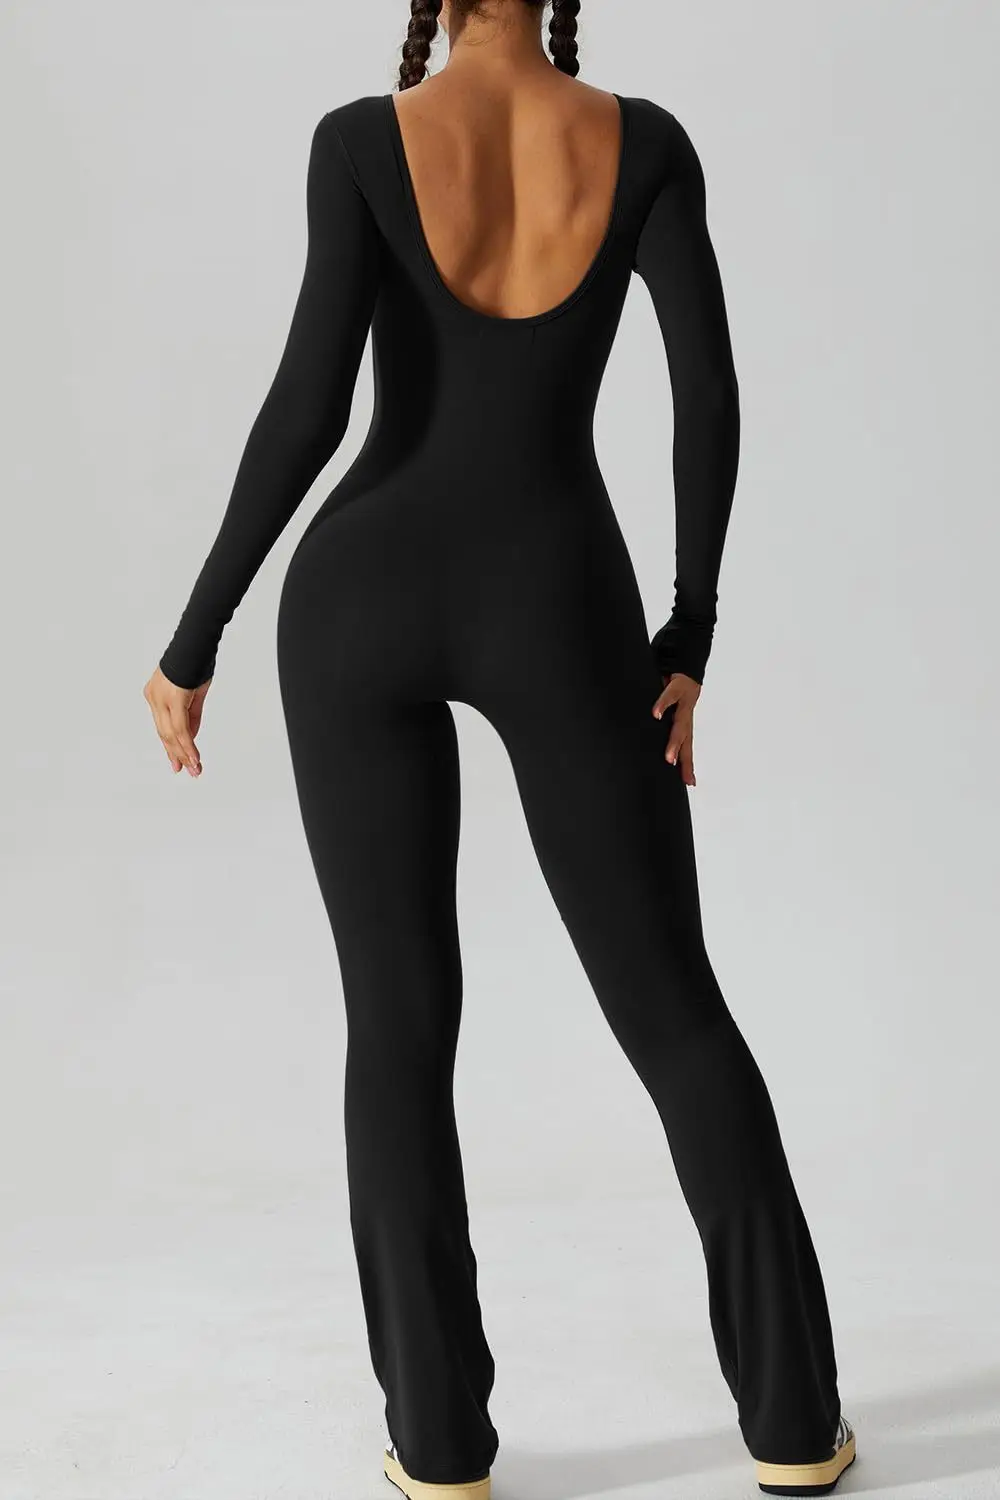 New Boat Neck Sexy One Piece U Cut Open Backless Long Sleeve Flare ...